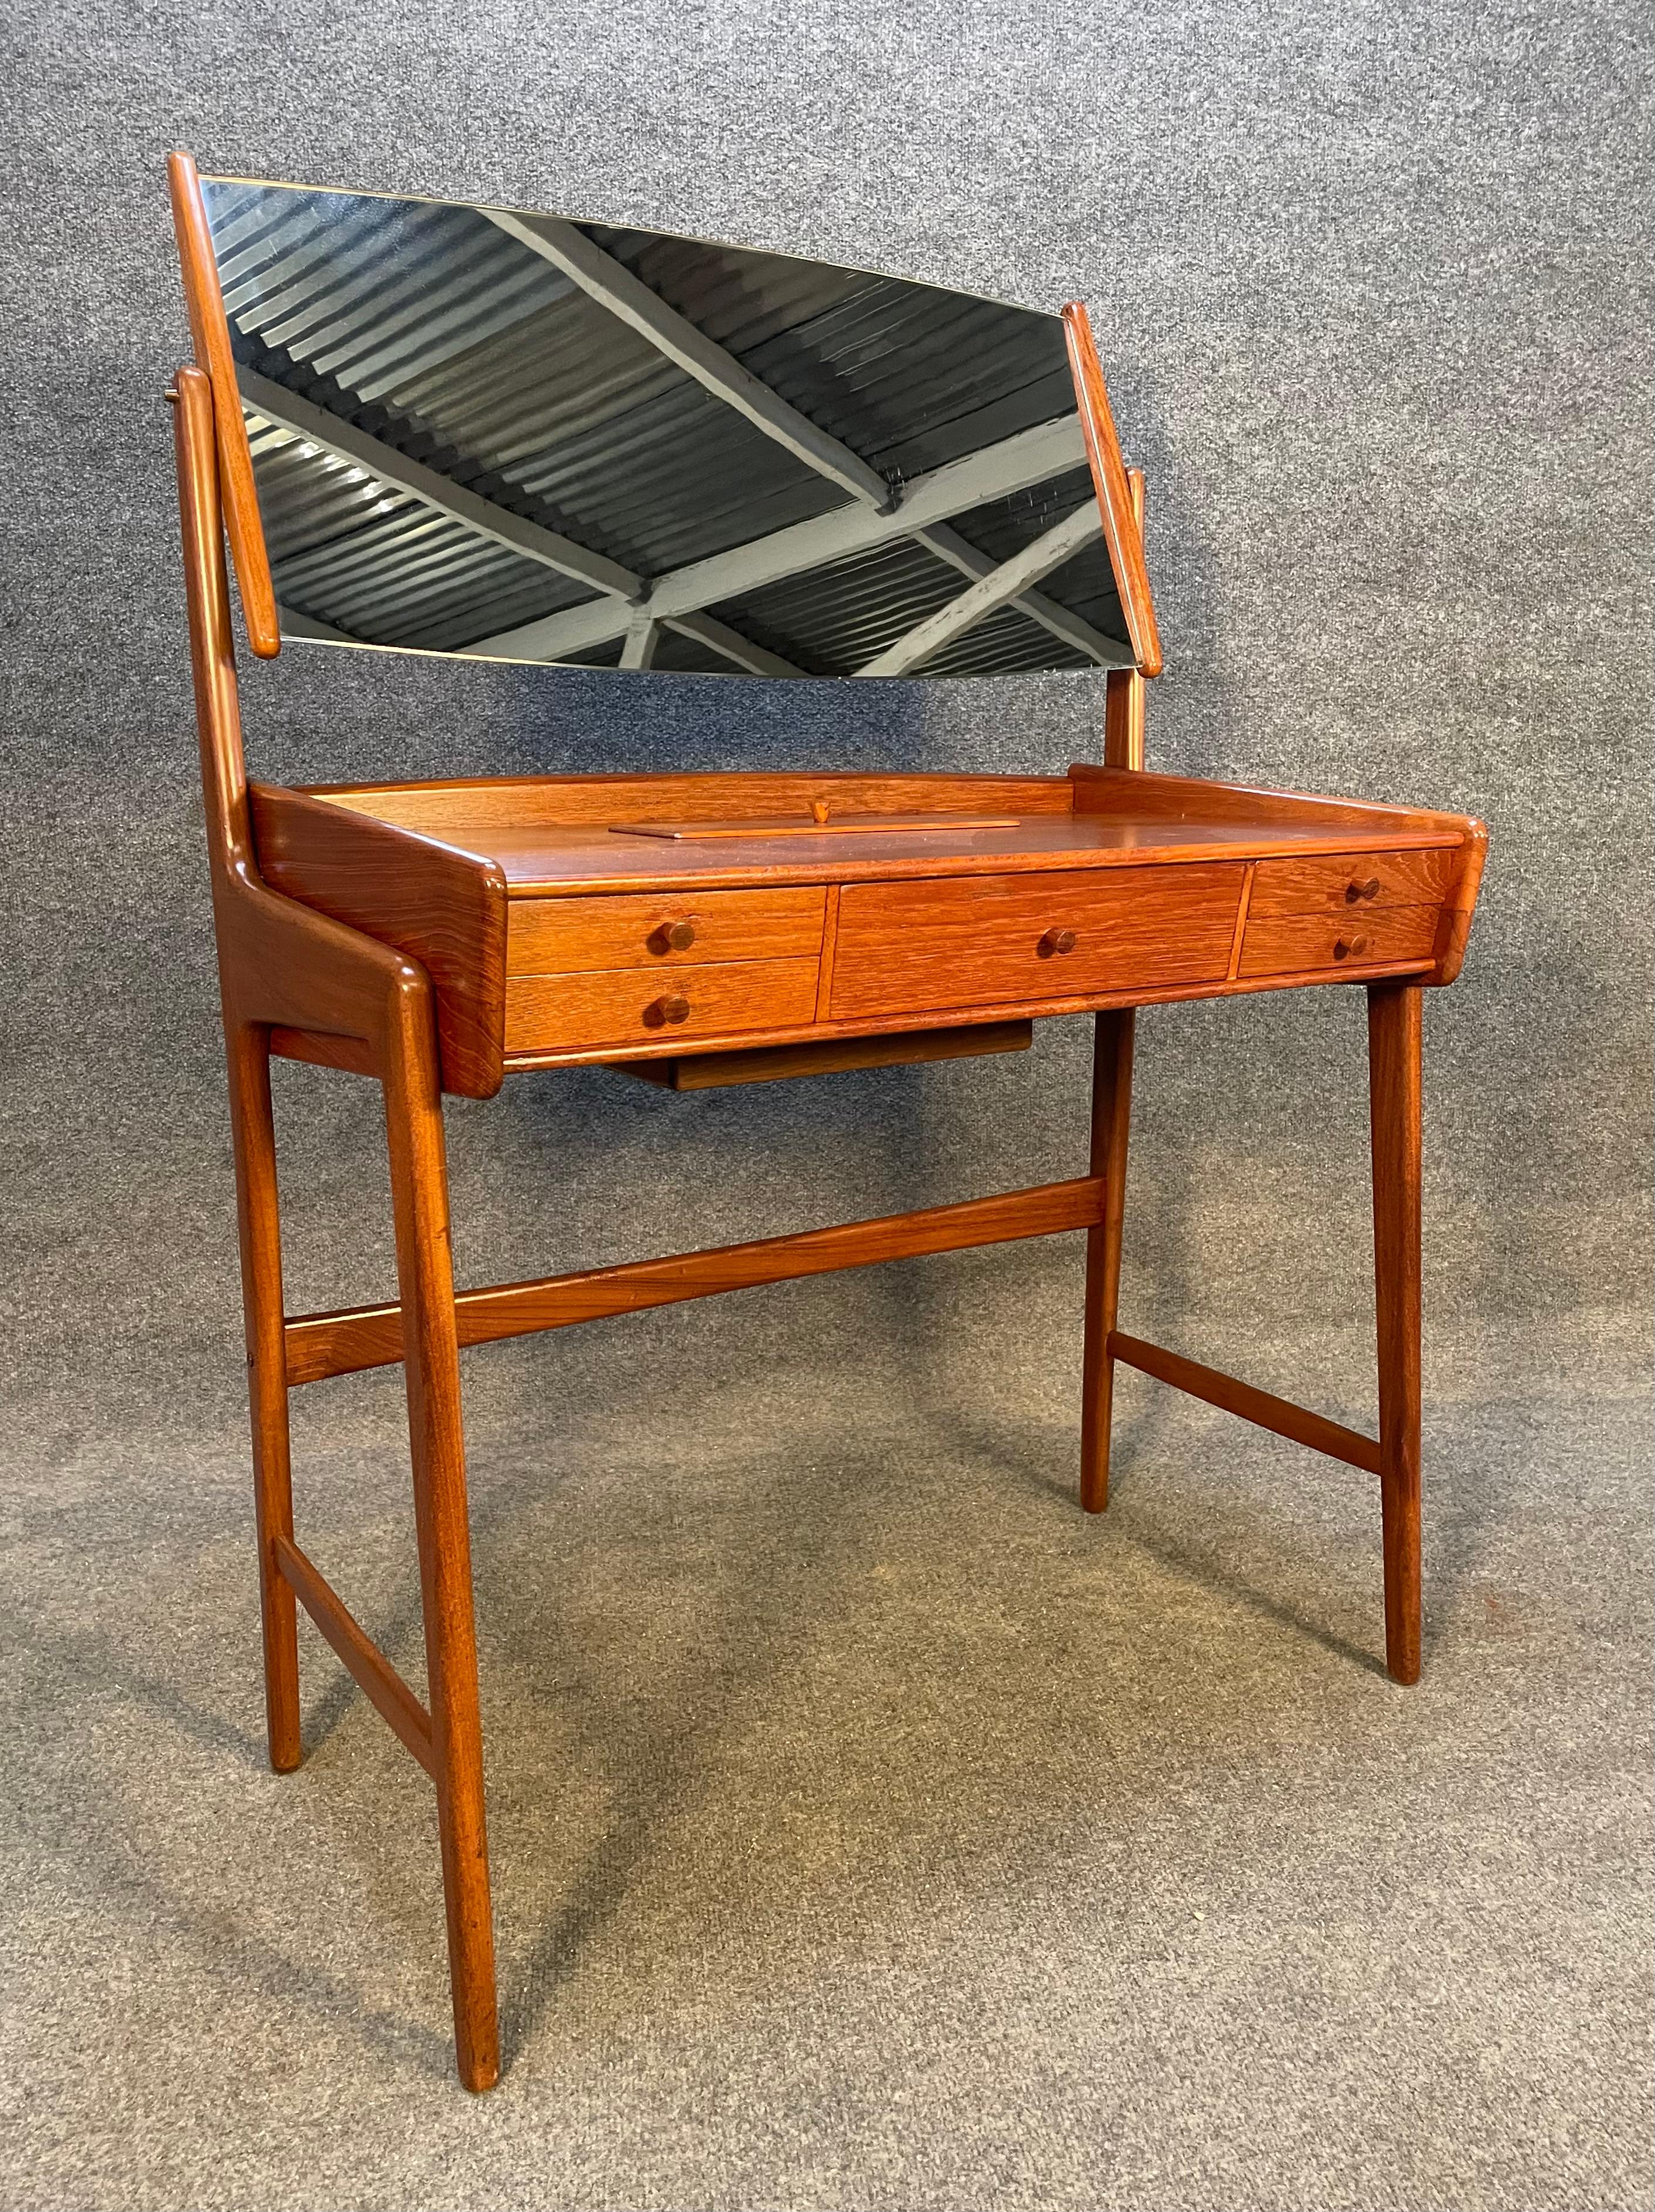 Here is a beautiful 1960's scandinavian modern dressing table in teak wood recently imported from Europe to California before its refinishing.
This exquisite piece features a sculptural frame in solid teak, a tilting adjustable mirror, five drawers